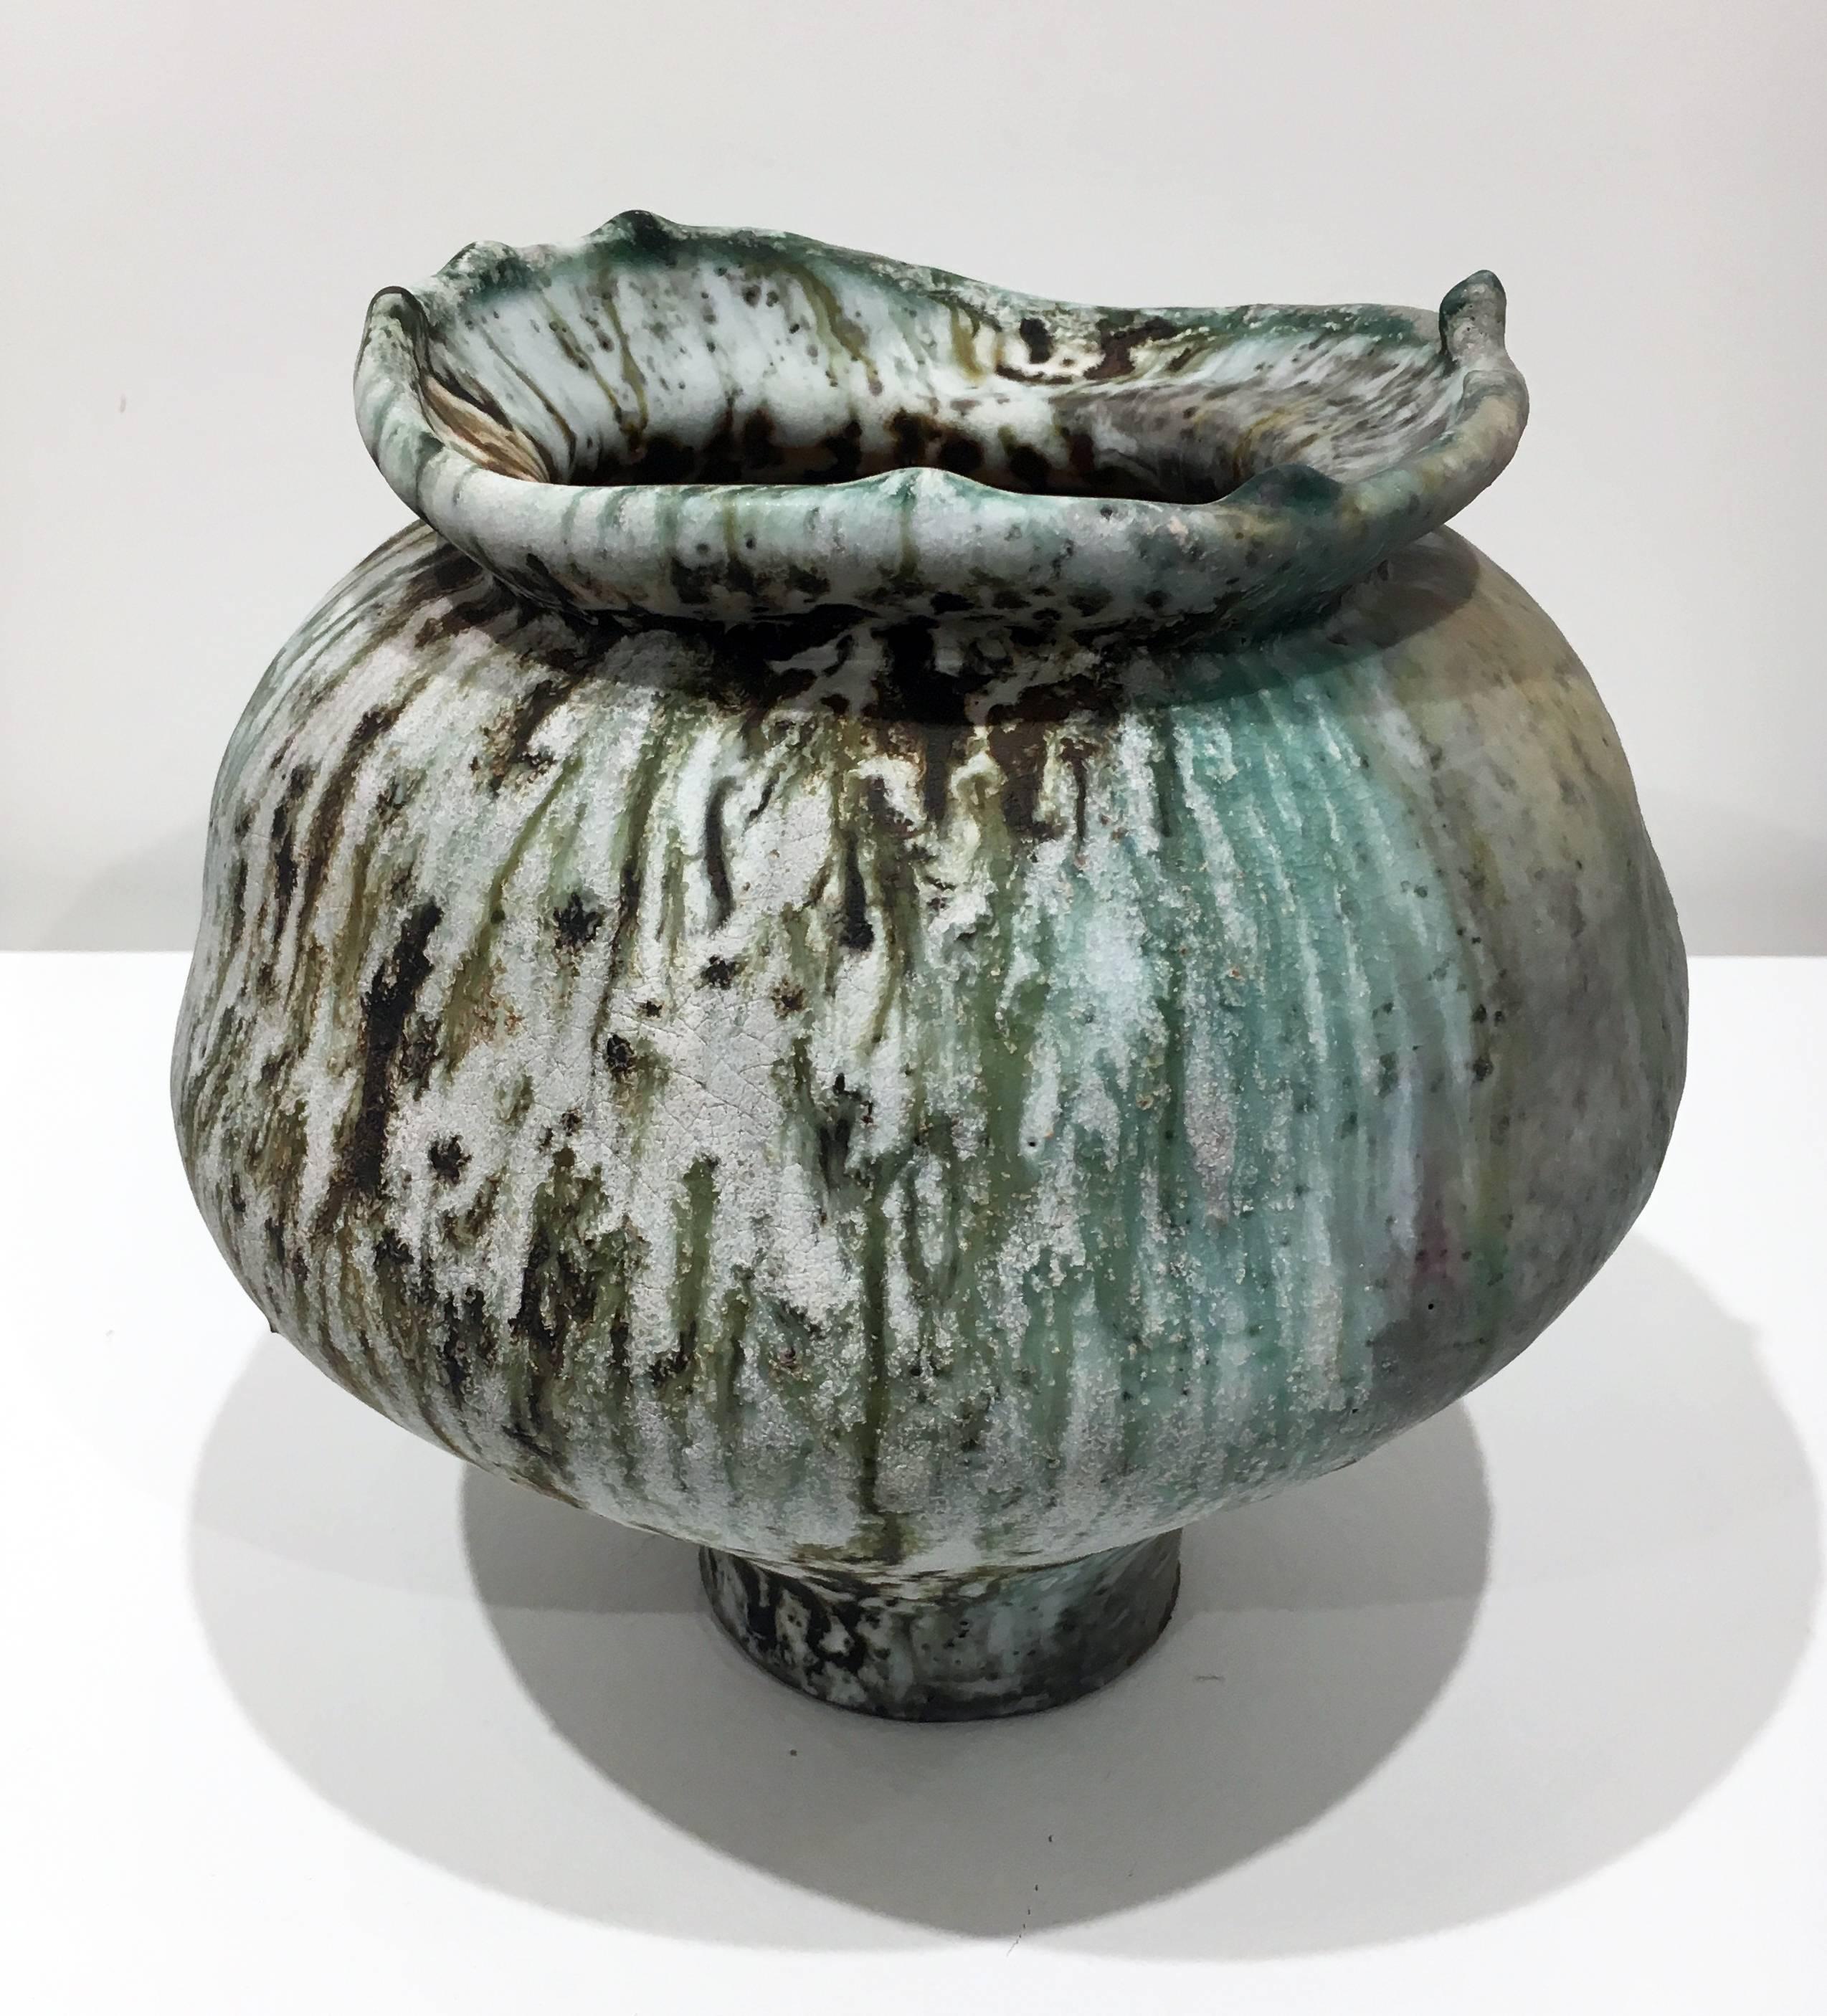 Moon Jar 04, Wood Fired Porcelain with Iron Inclusions - Art by Perry Haas